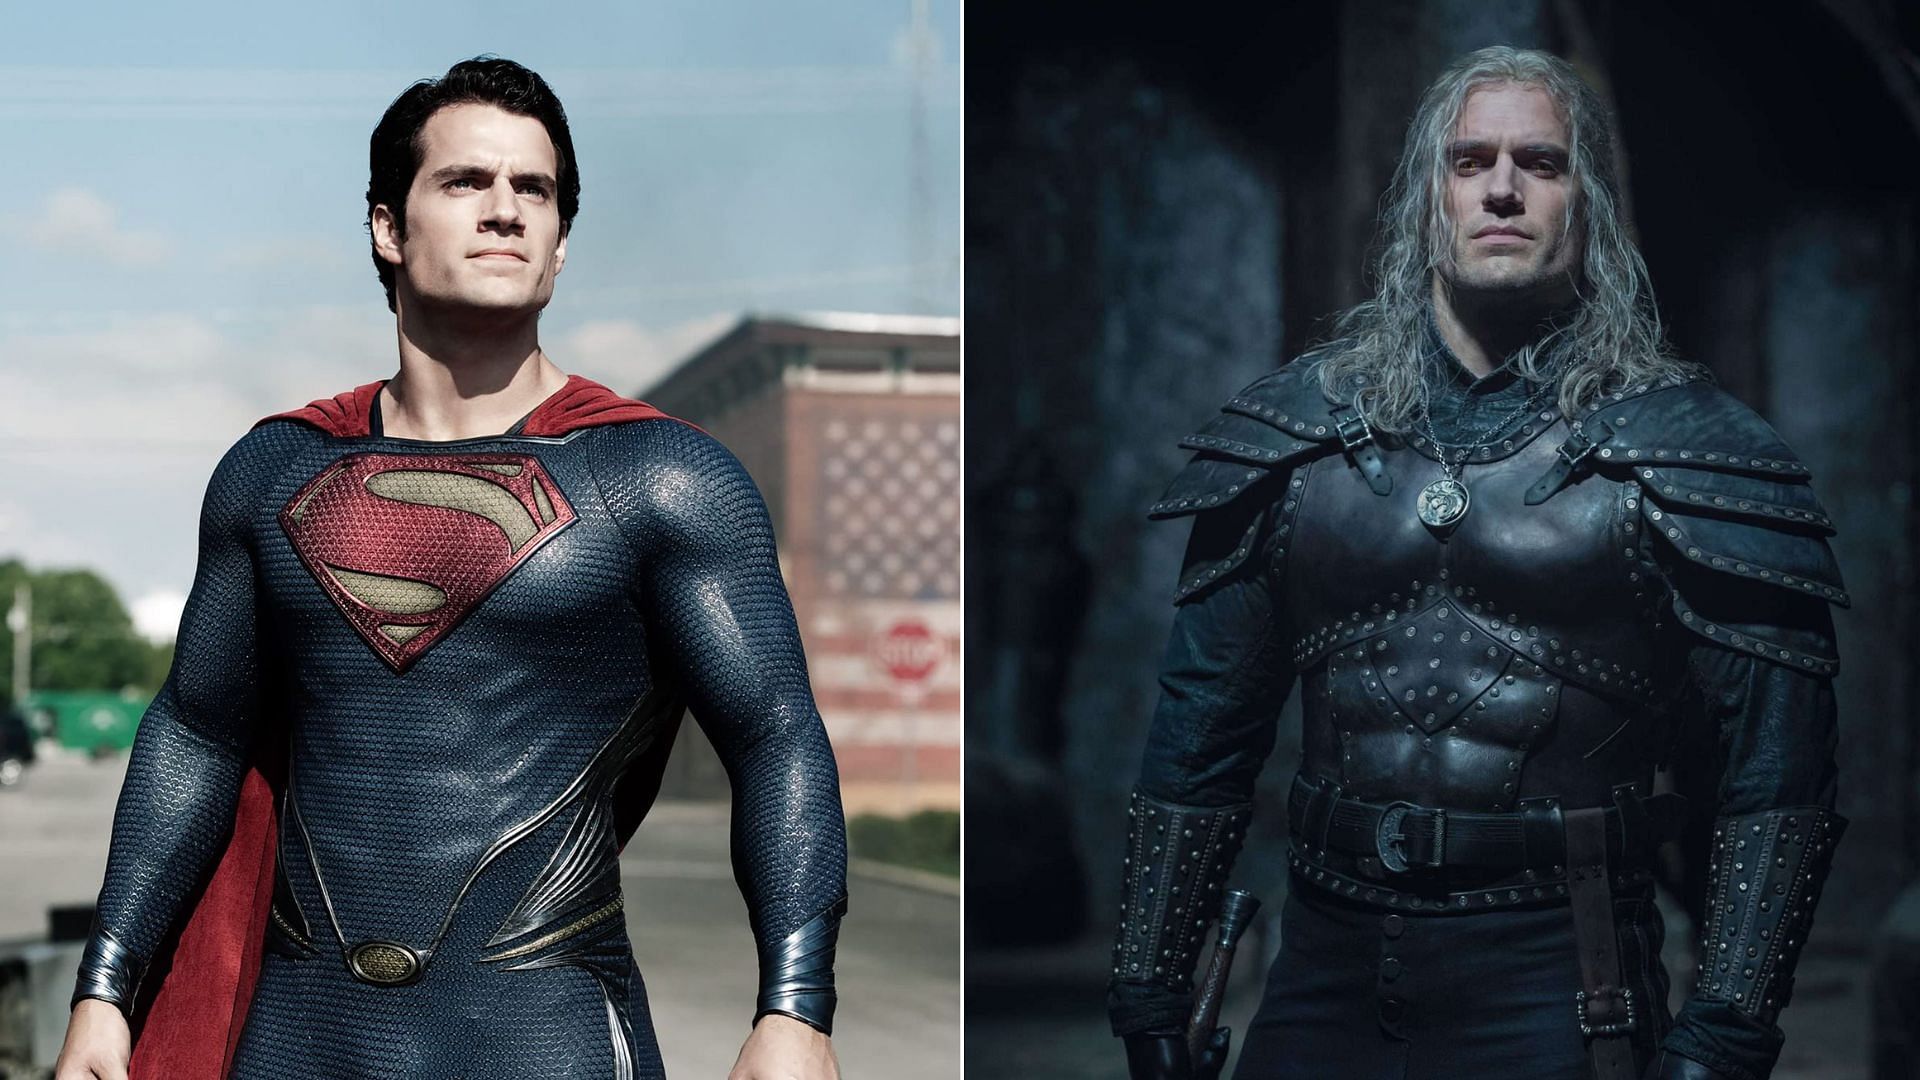 Henry Cavill is set to star in Amazon